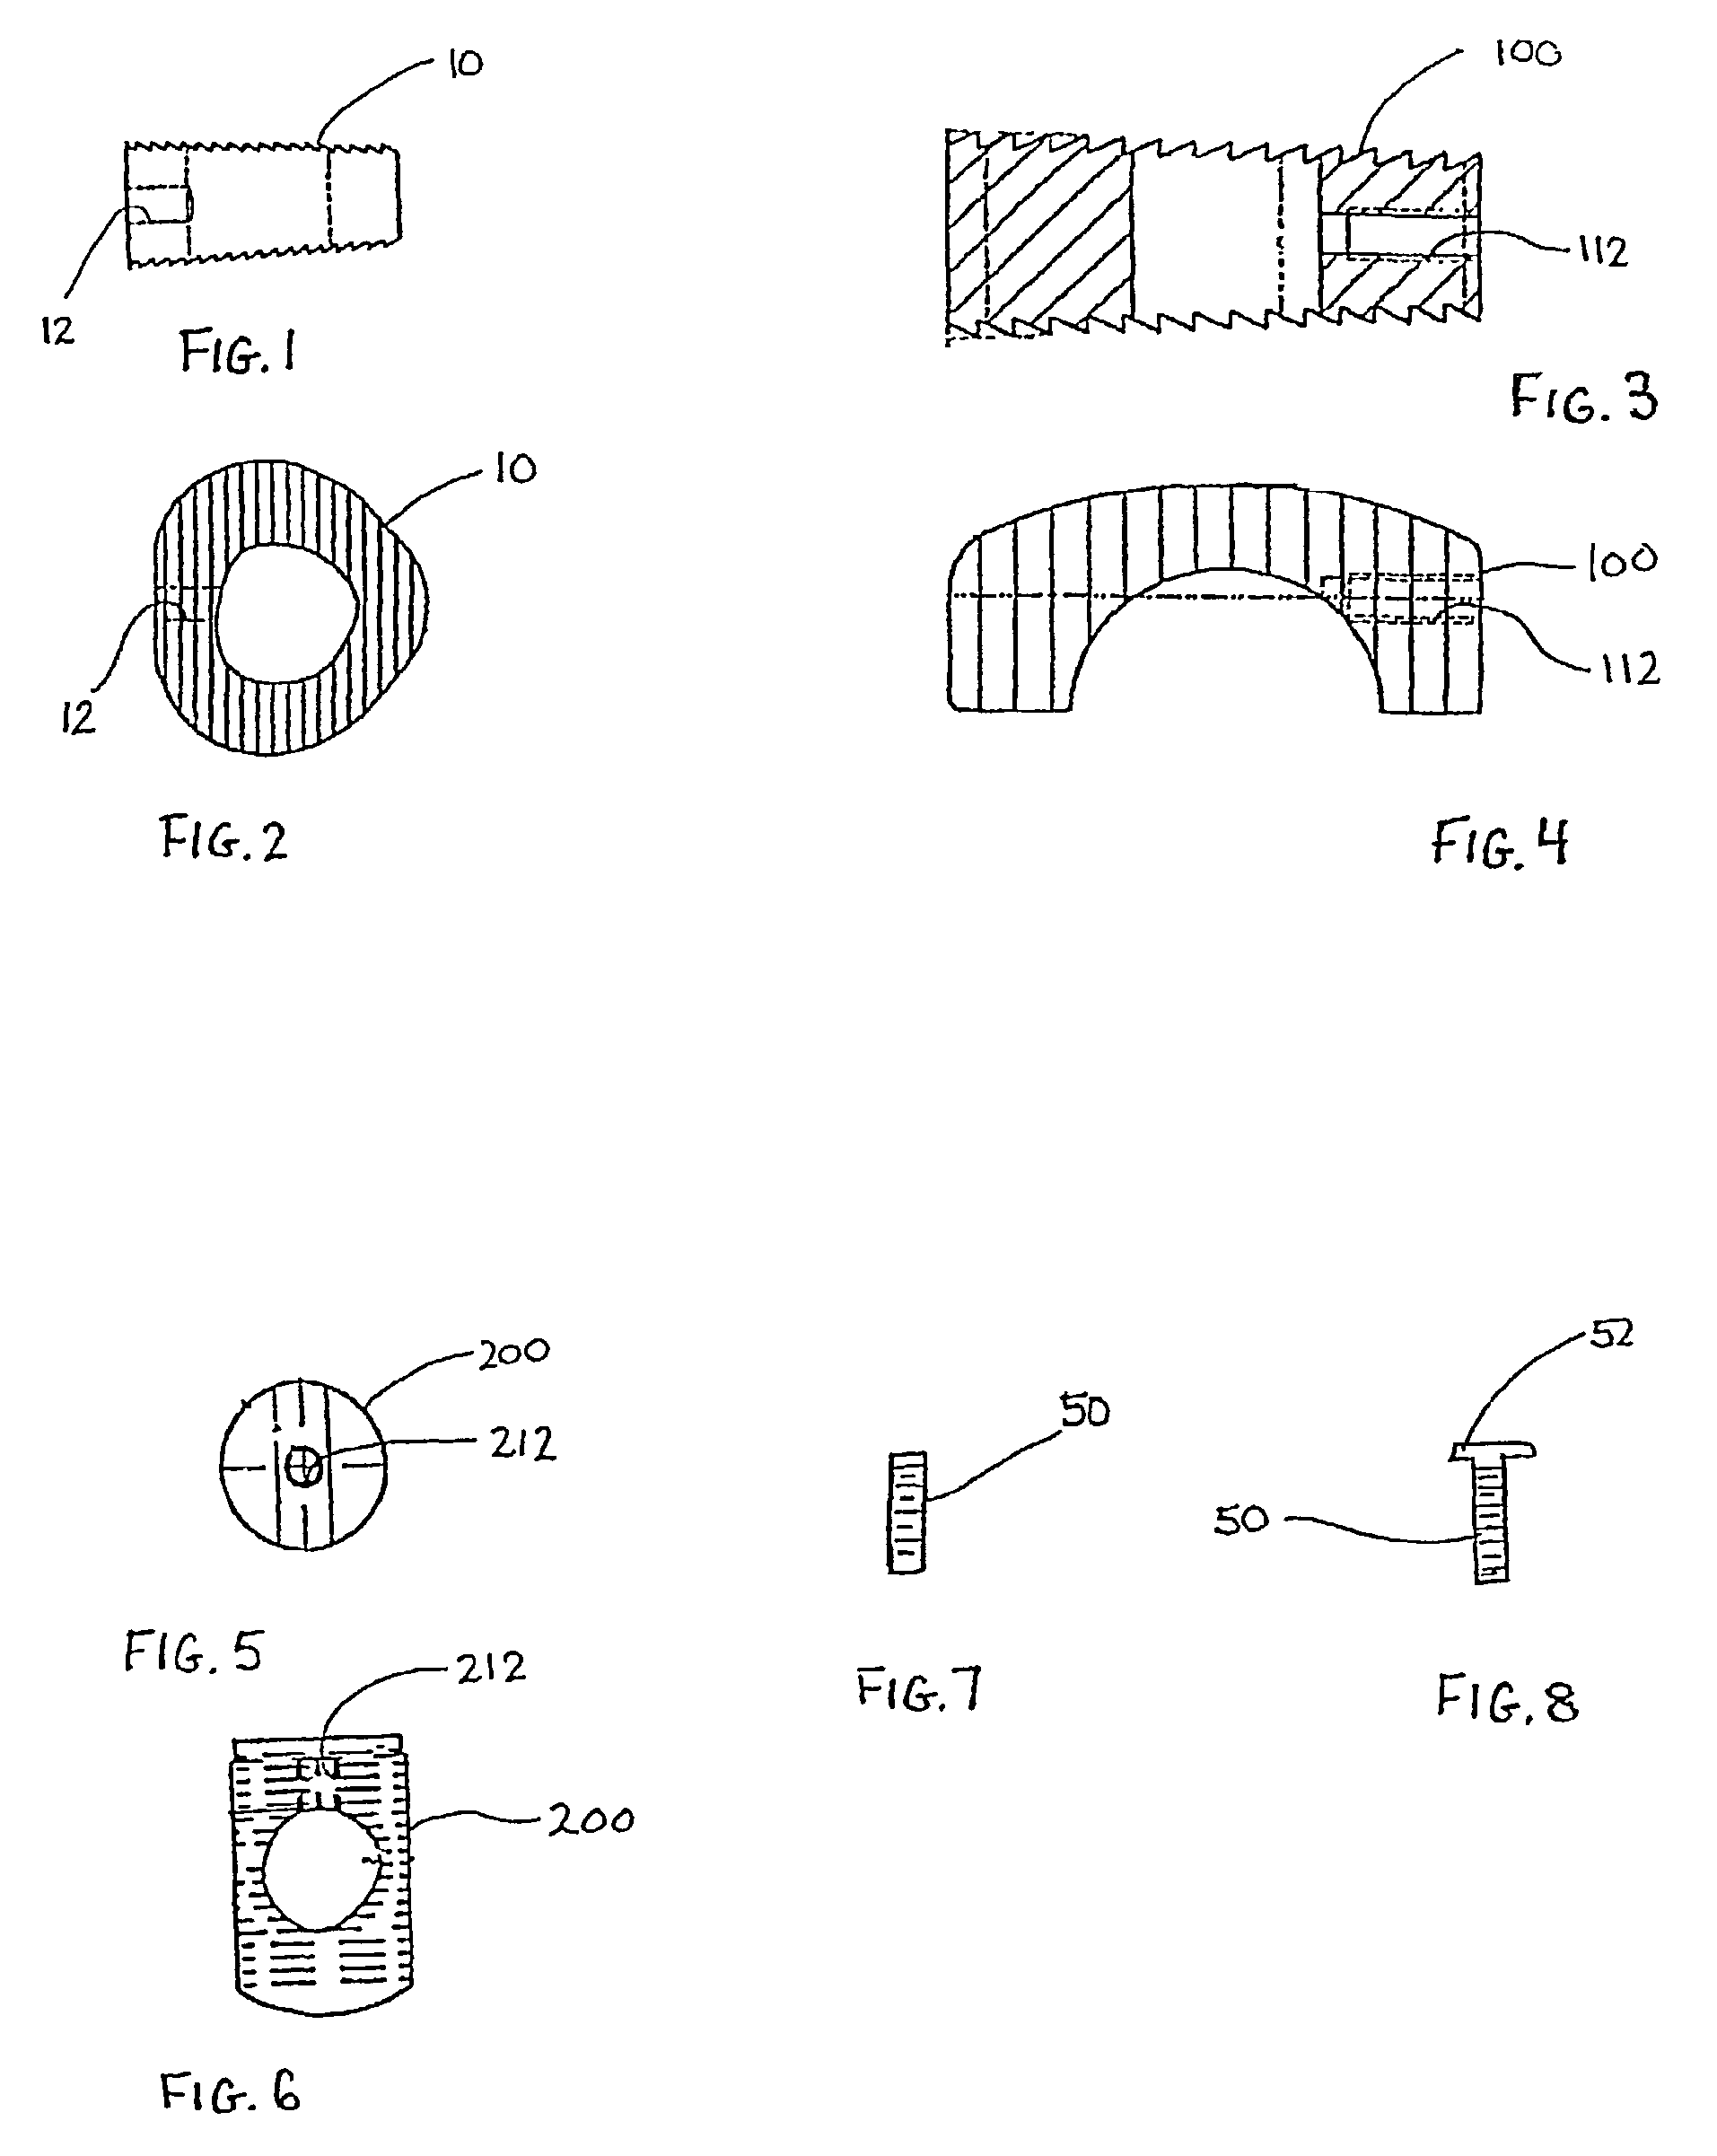 Osteoimplant and method for making same